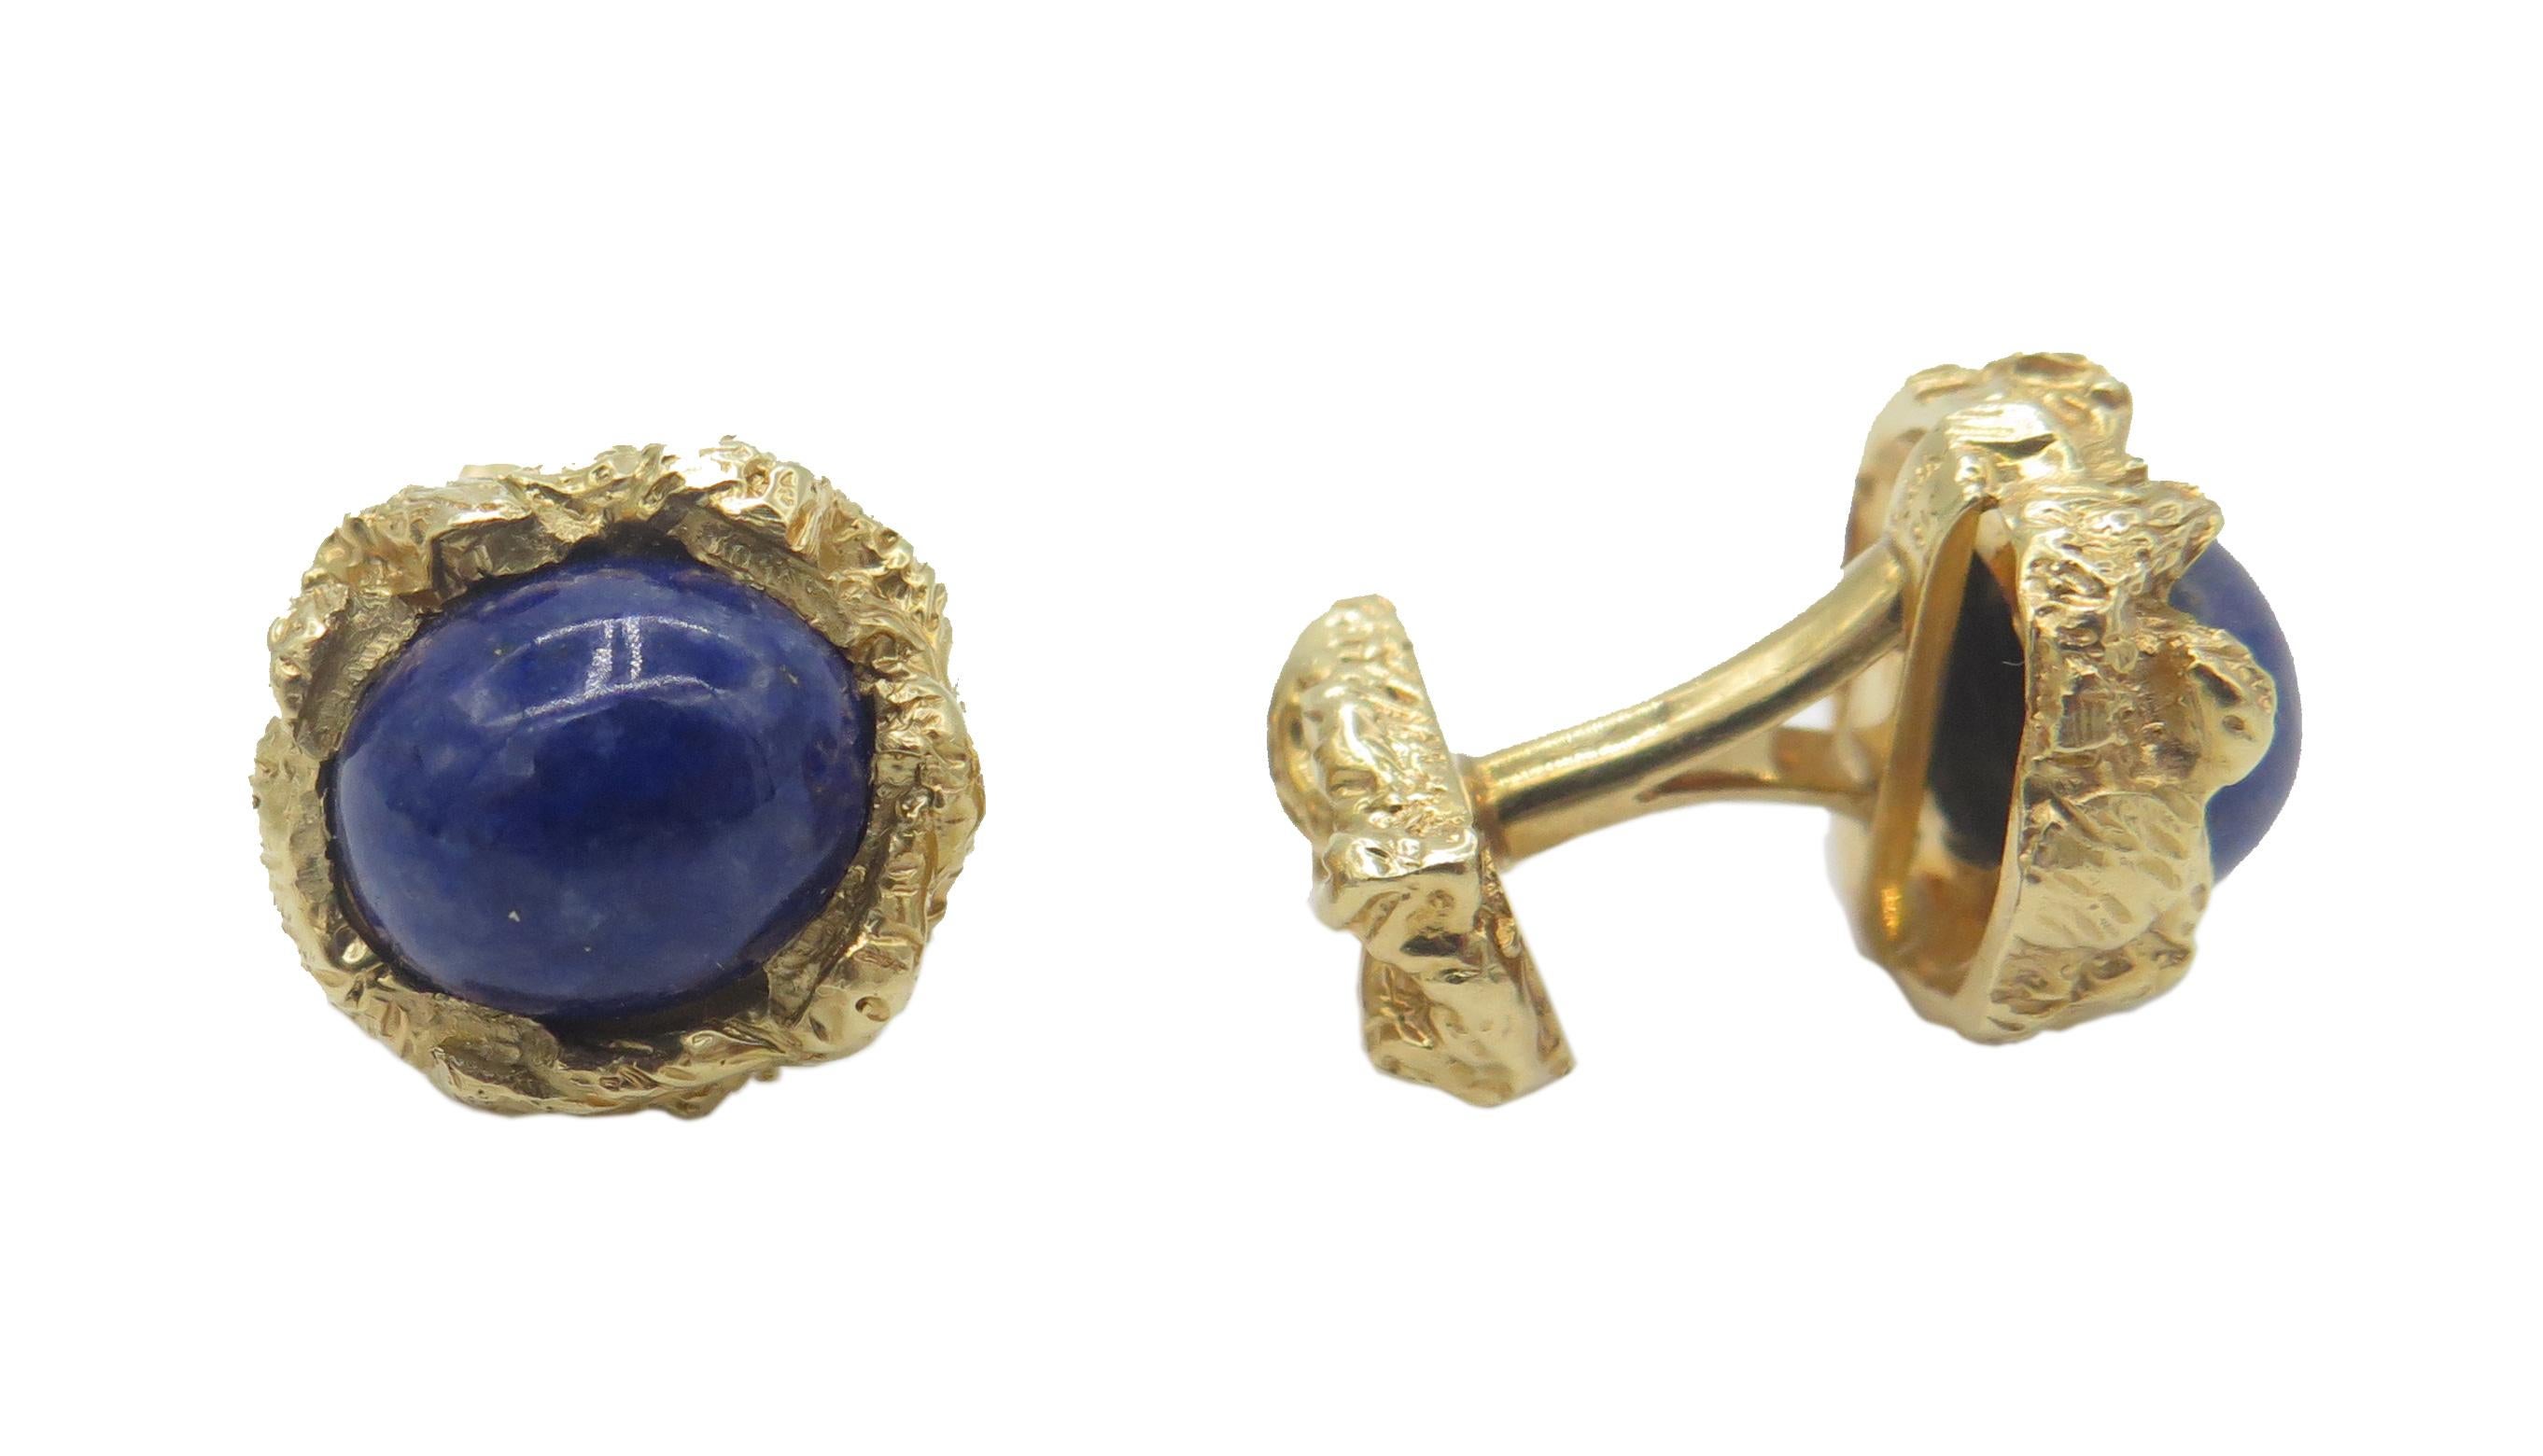 We have a beautiful, elegant 18kt yellow gold Blue Lapiz cuff links set. With a beautiful round Blue Lapiz these cuff links weigh 25.6 grams and are 1